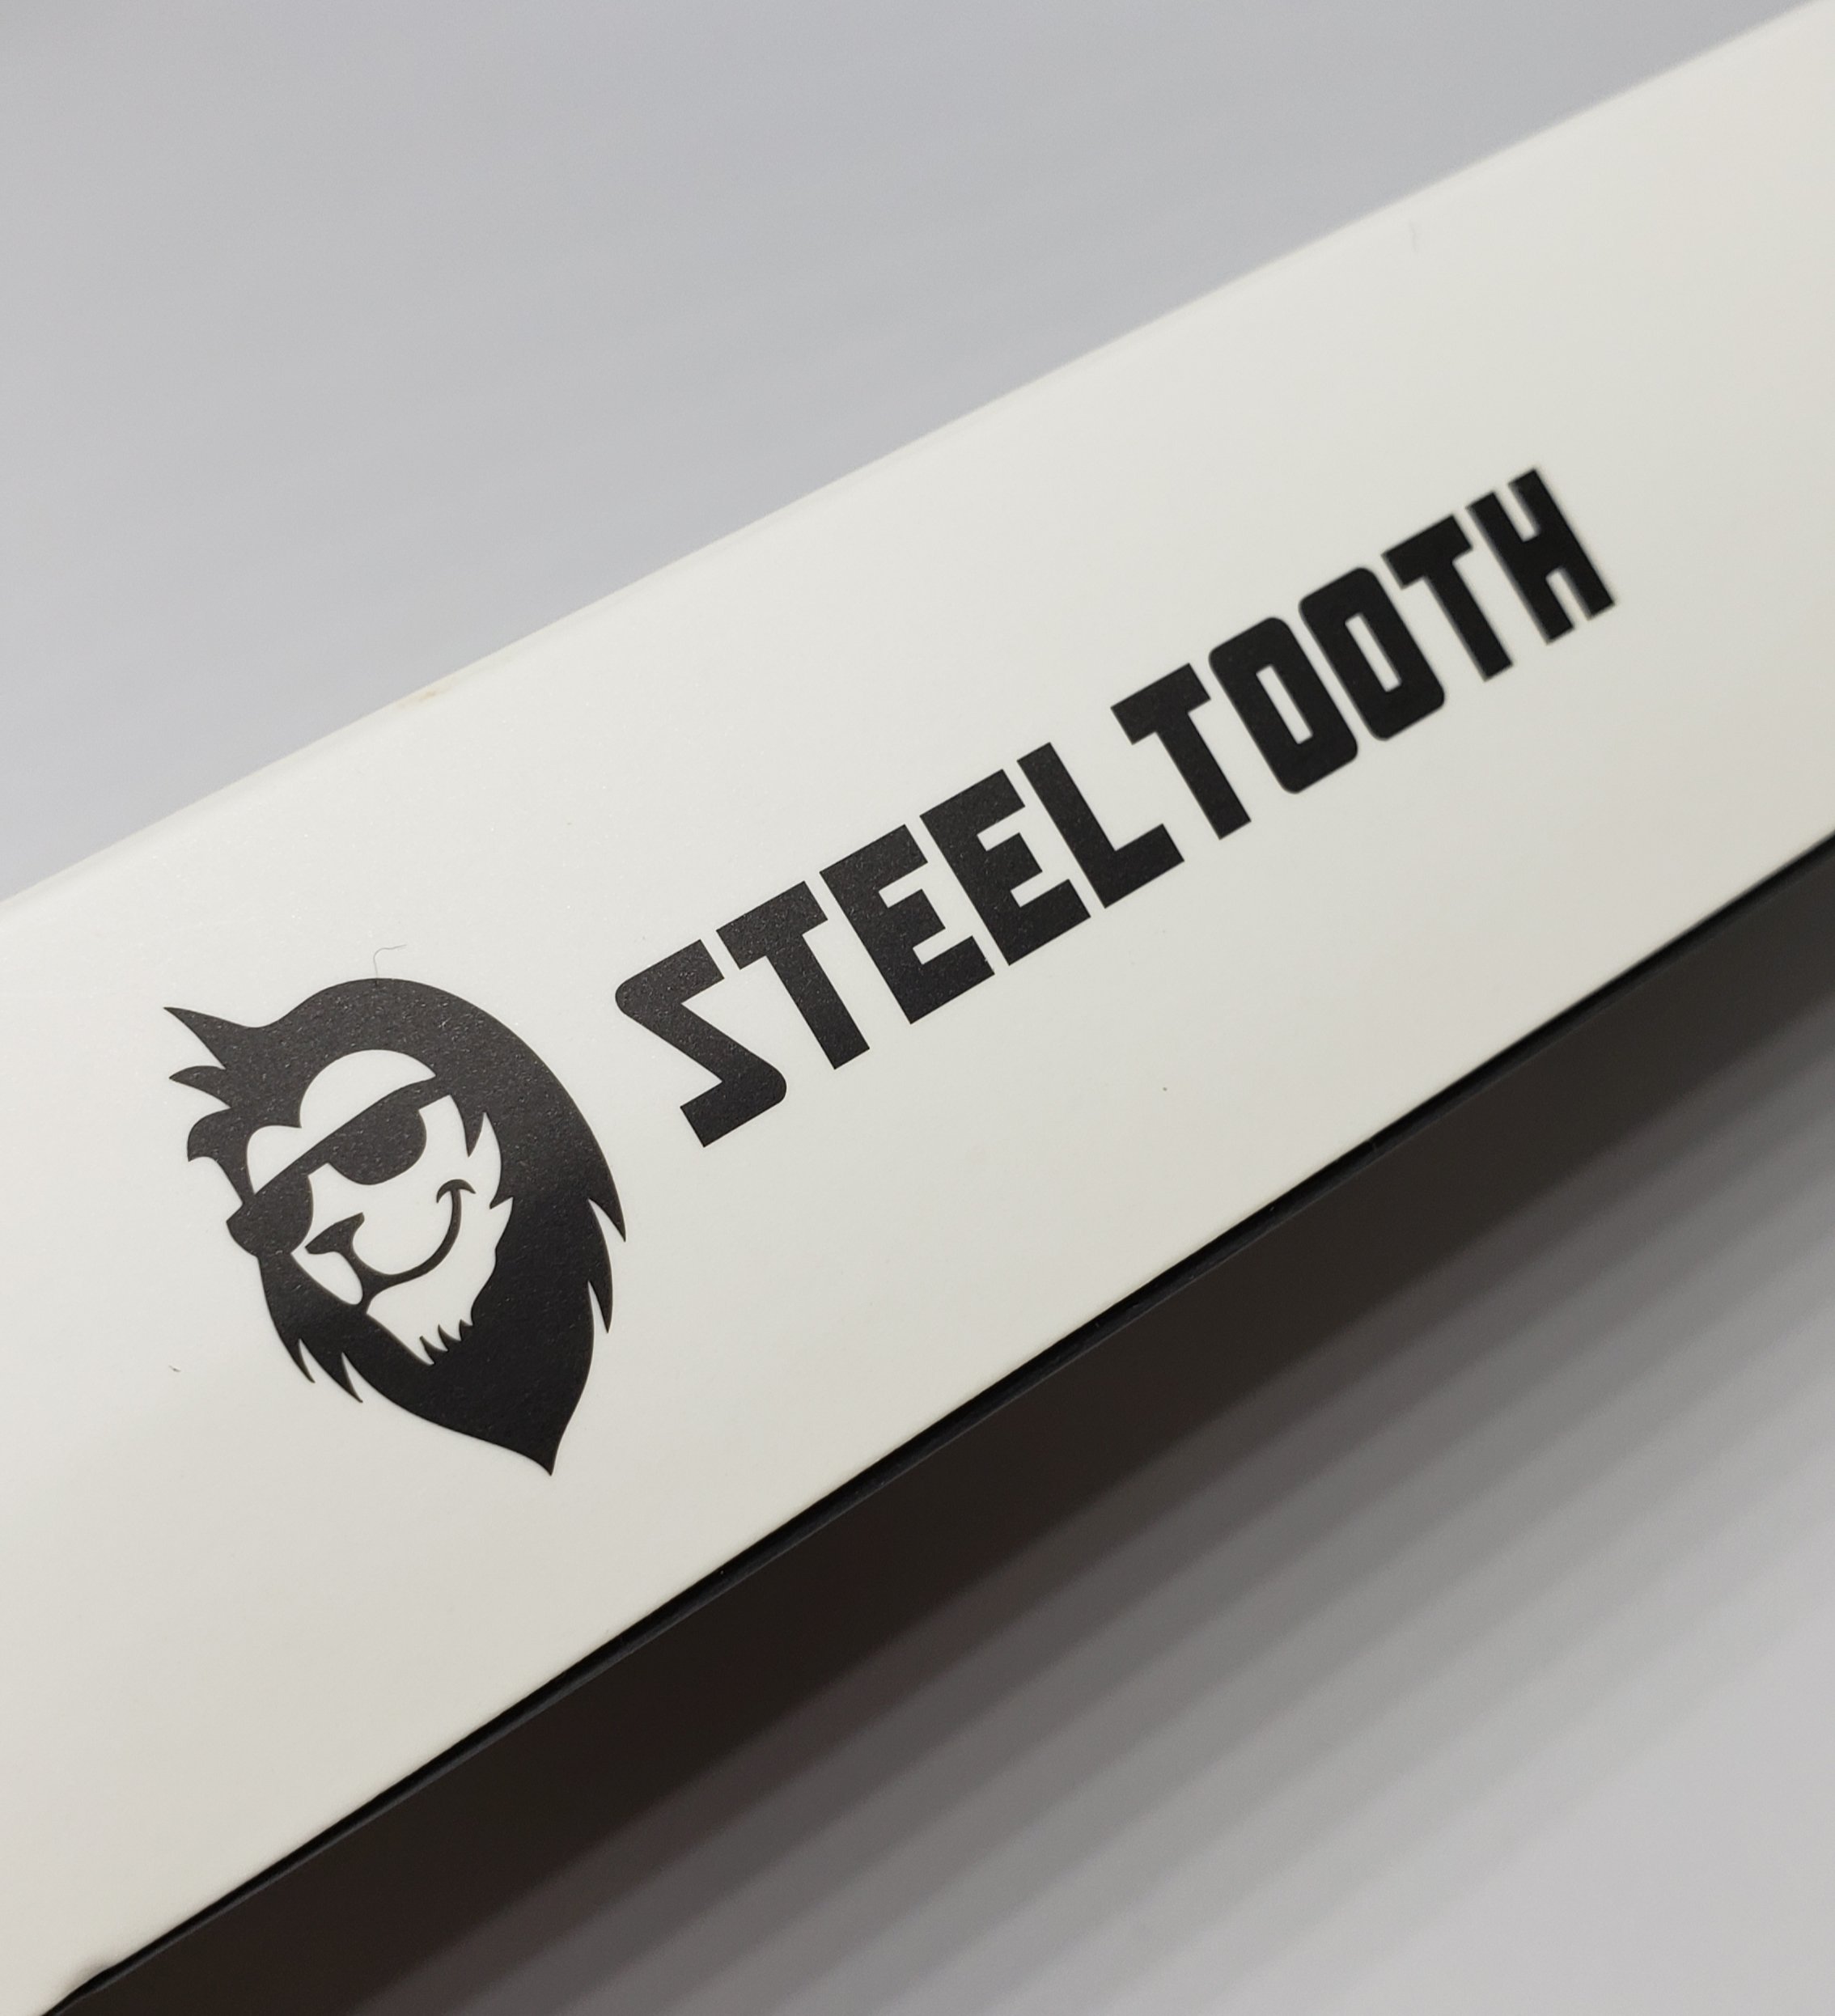 Steel Tooth